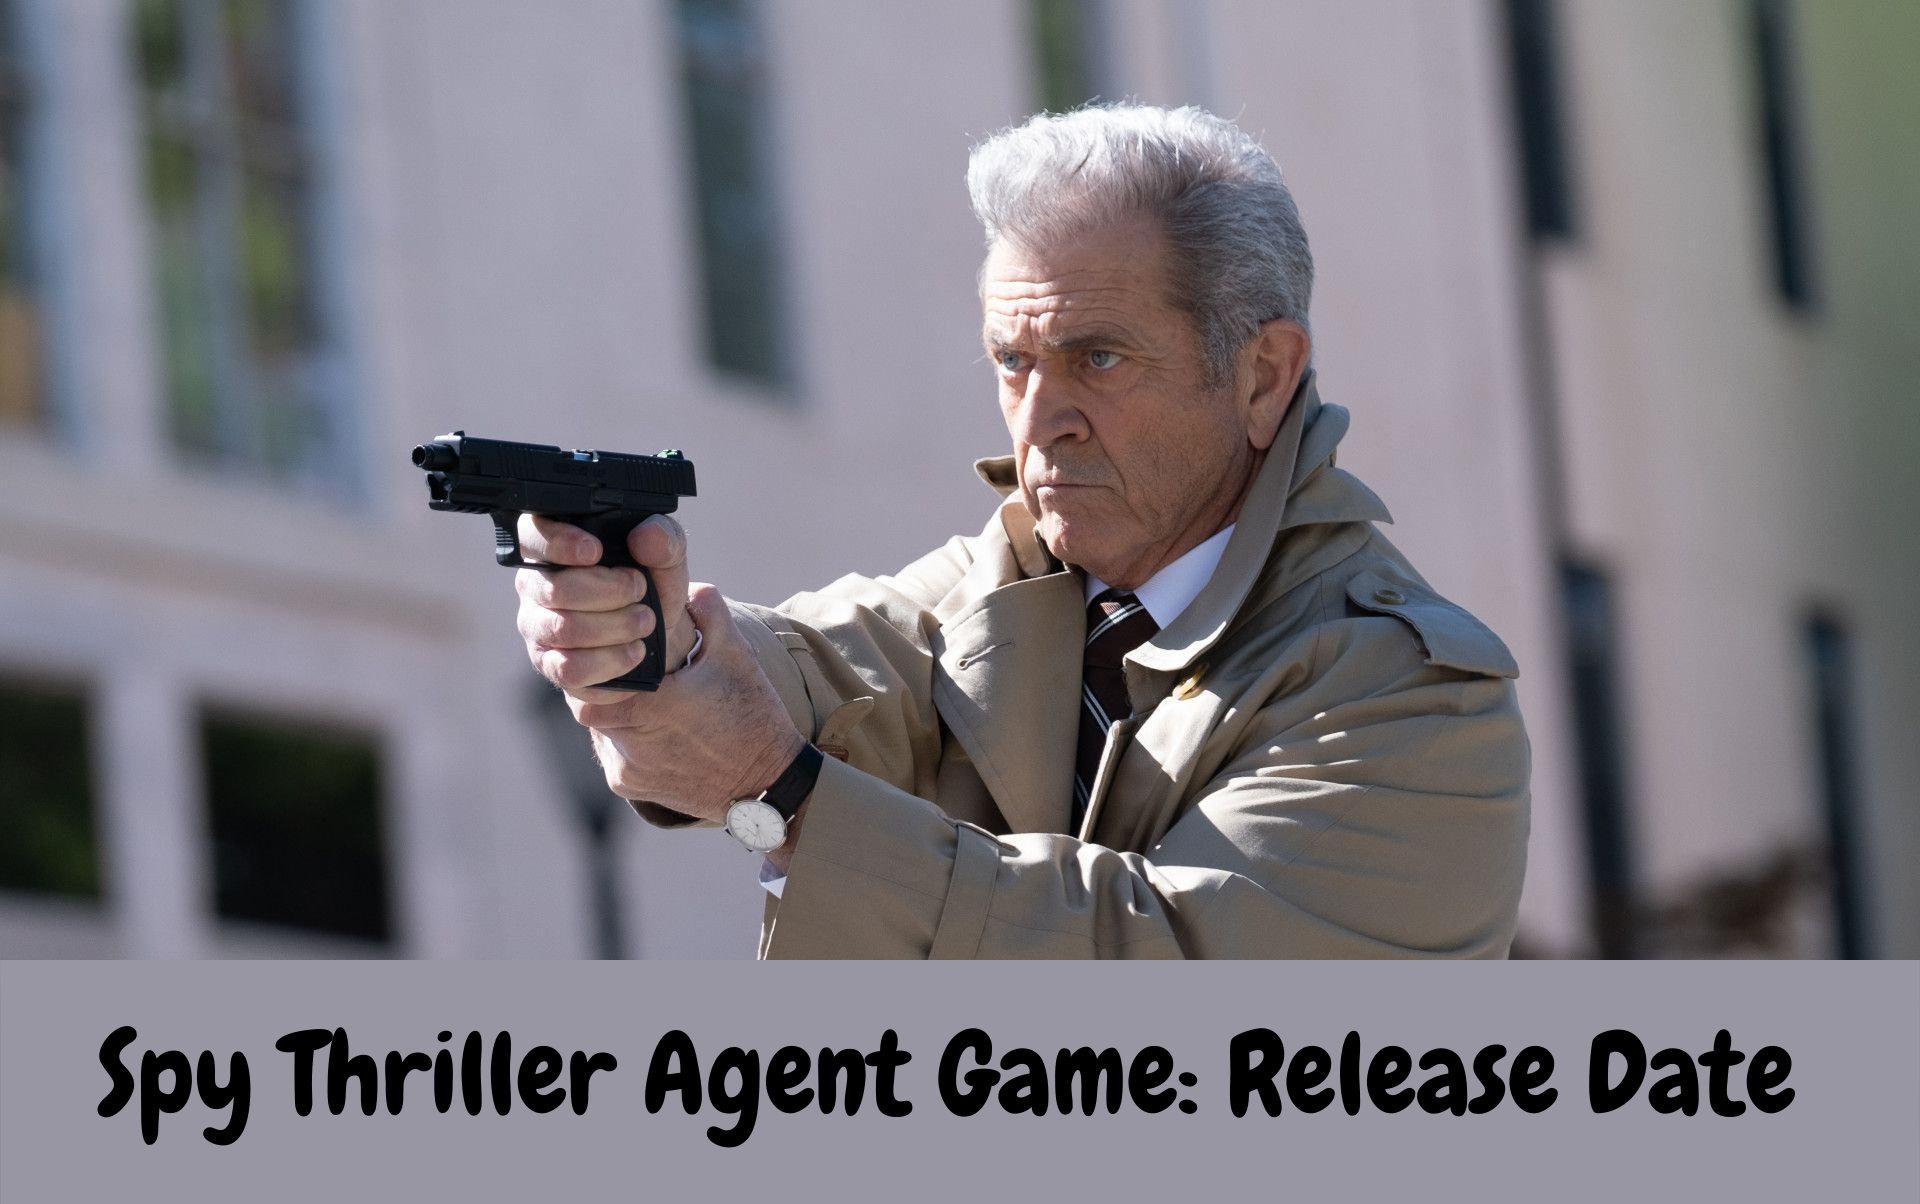 Spy Thriller Agent Game has a new trailer starring Mel Gibson